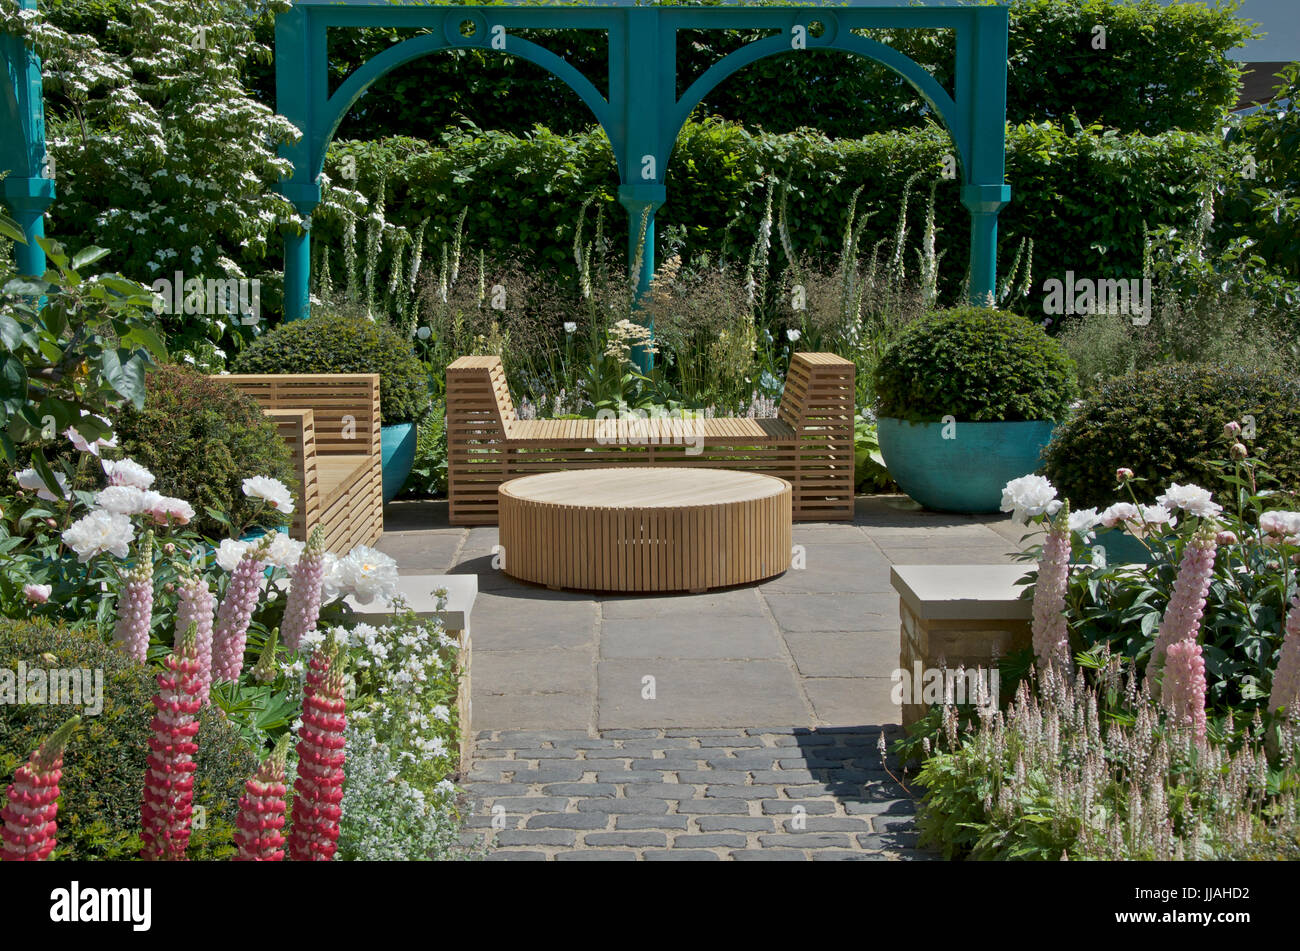 500 years of covent garden show garden at rhs chelsea flower show